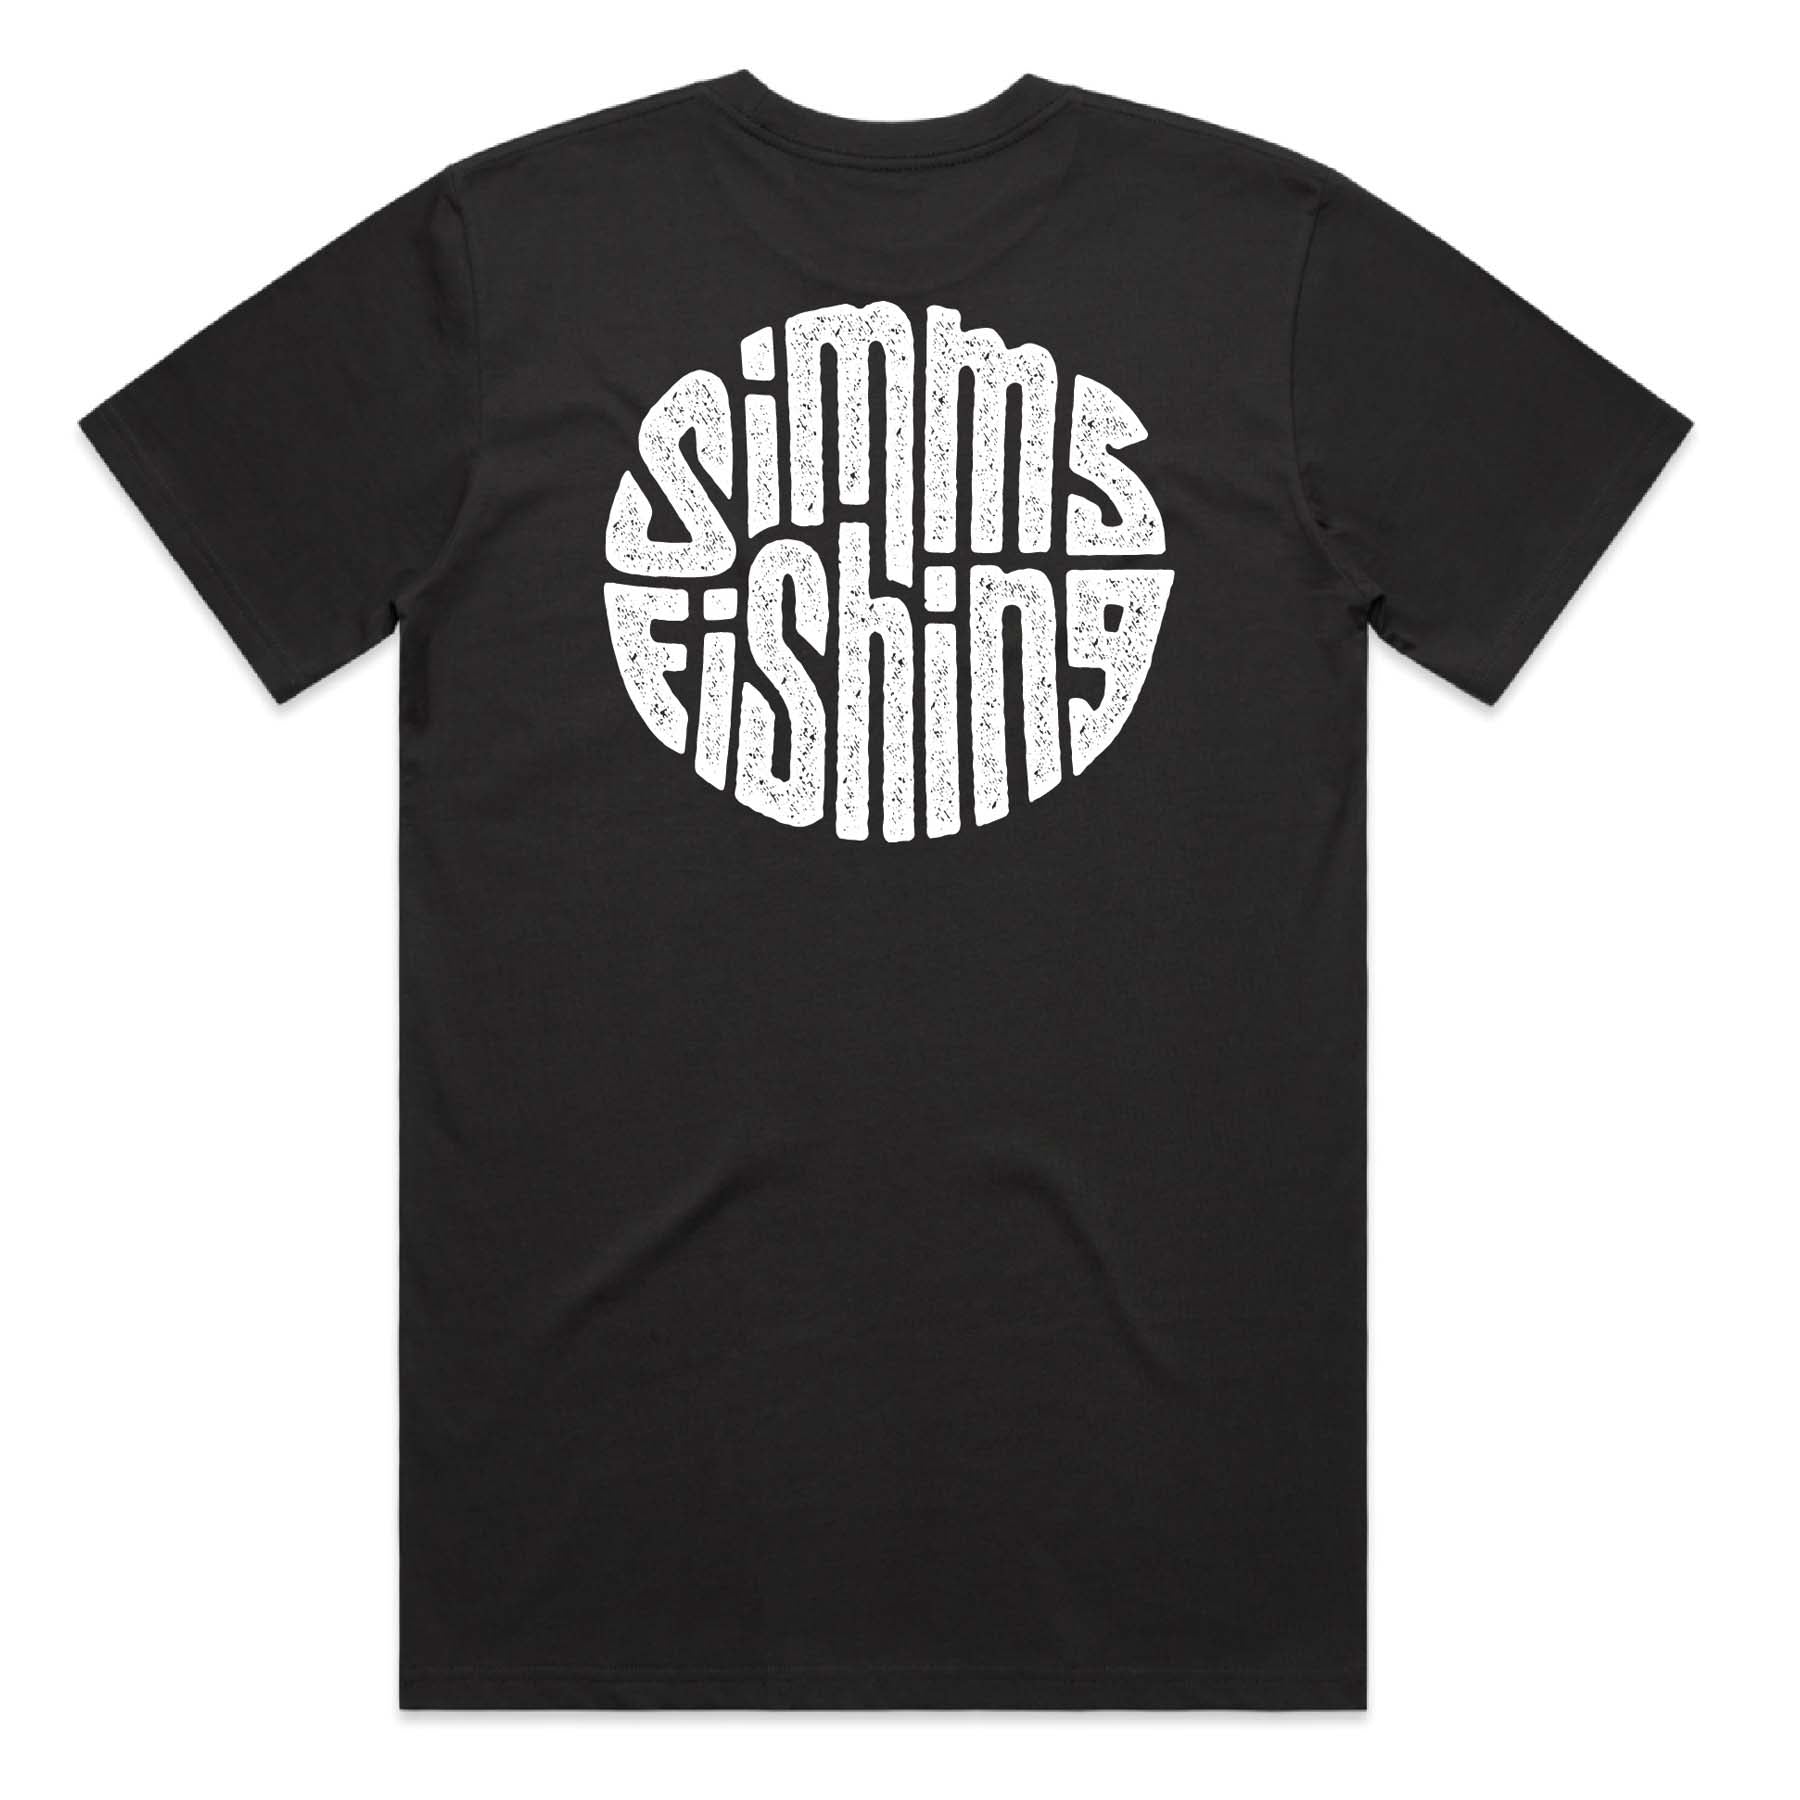 2023 Simms Fly Fishing Logo T's – Manic Tackle Project